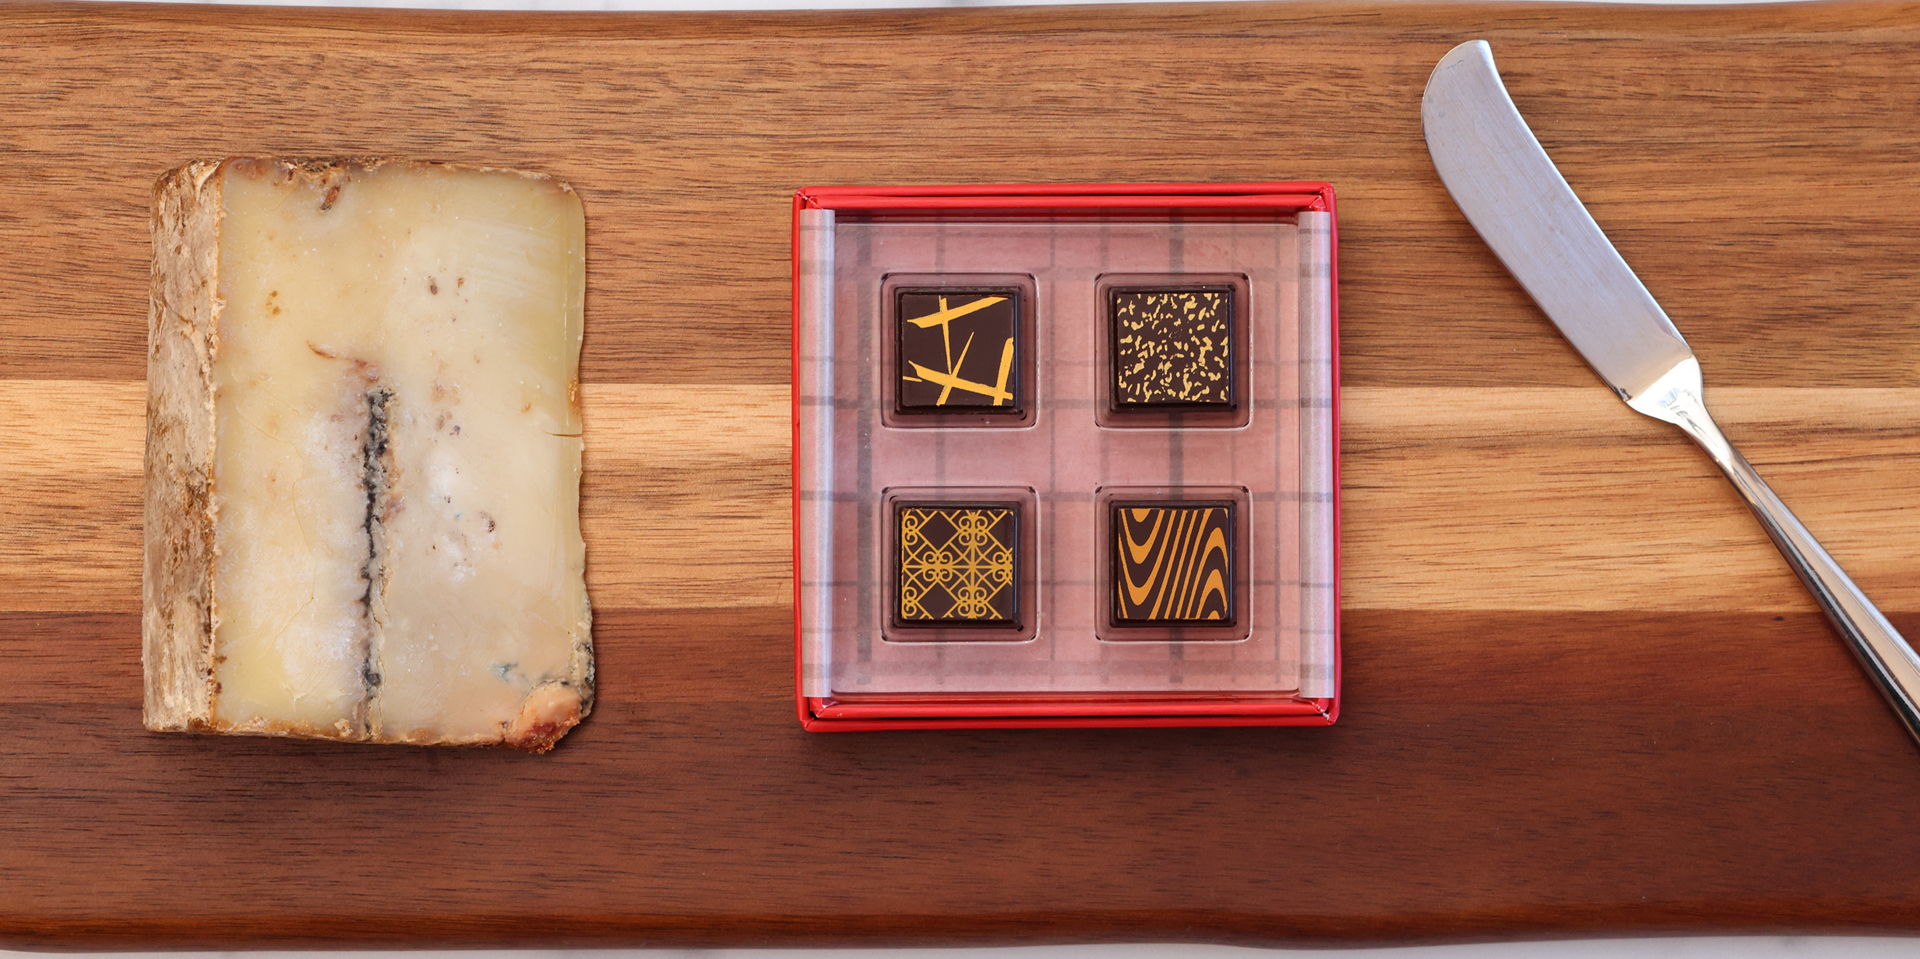 Cheese & Chocolate: Virtual pairing experience with Laura Werlin  promotional image